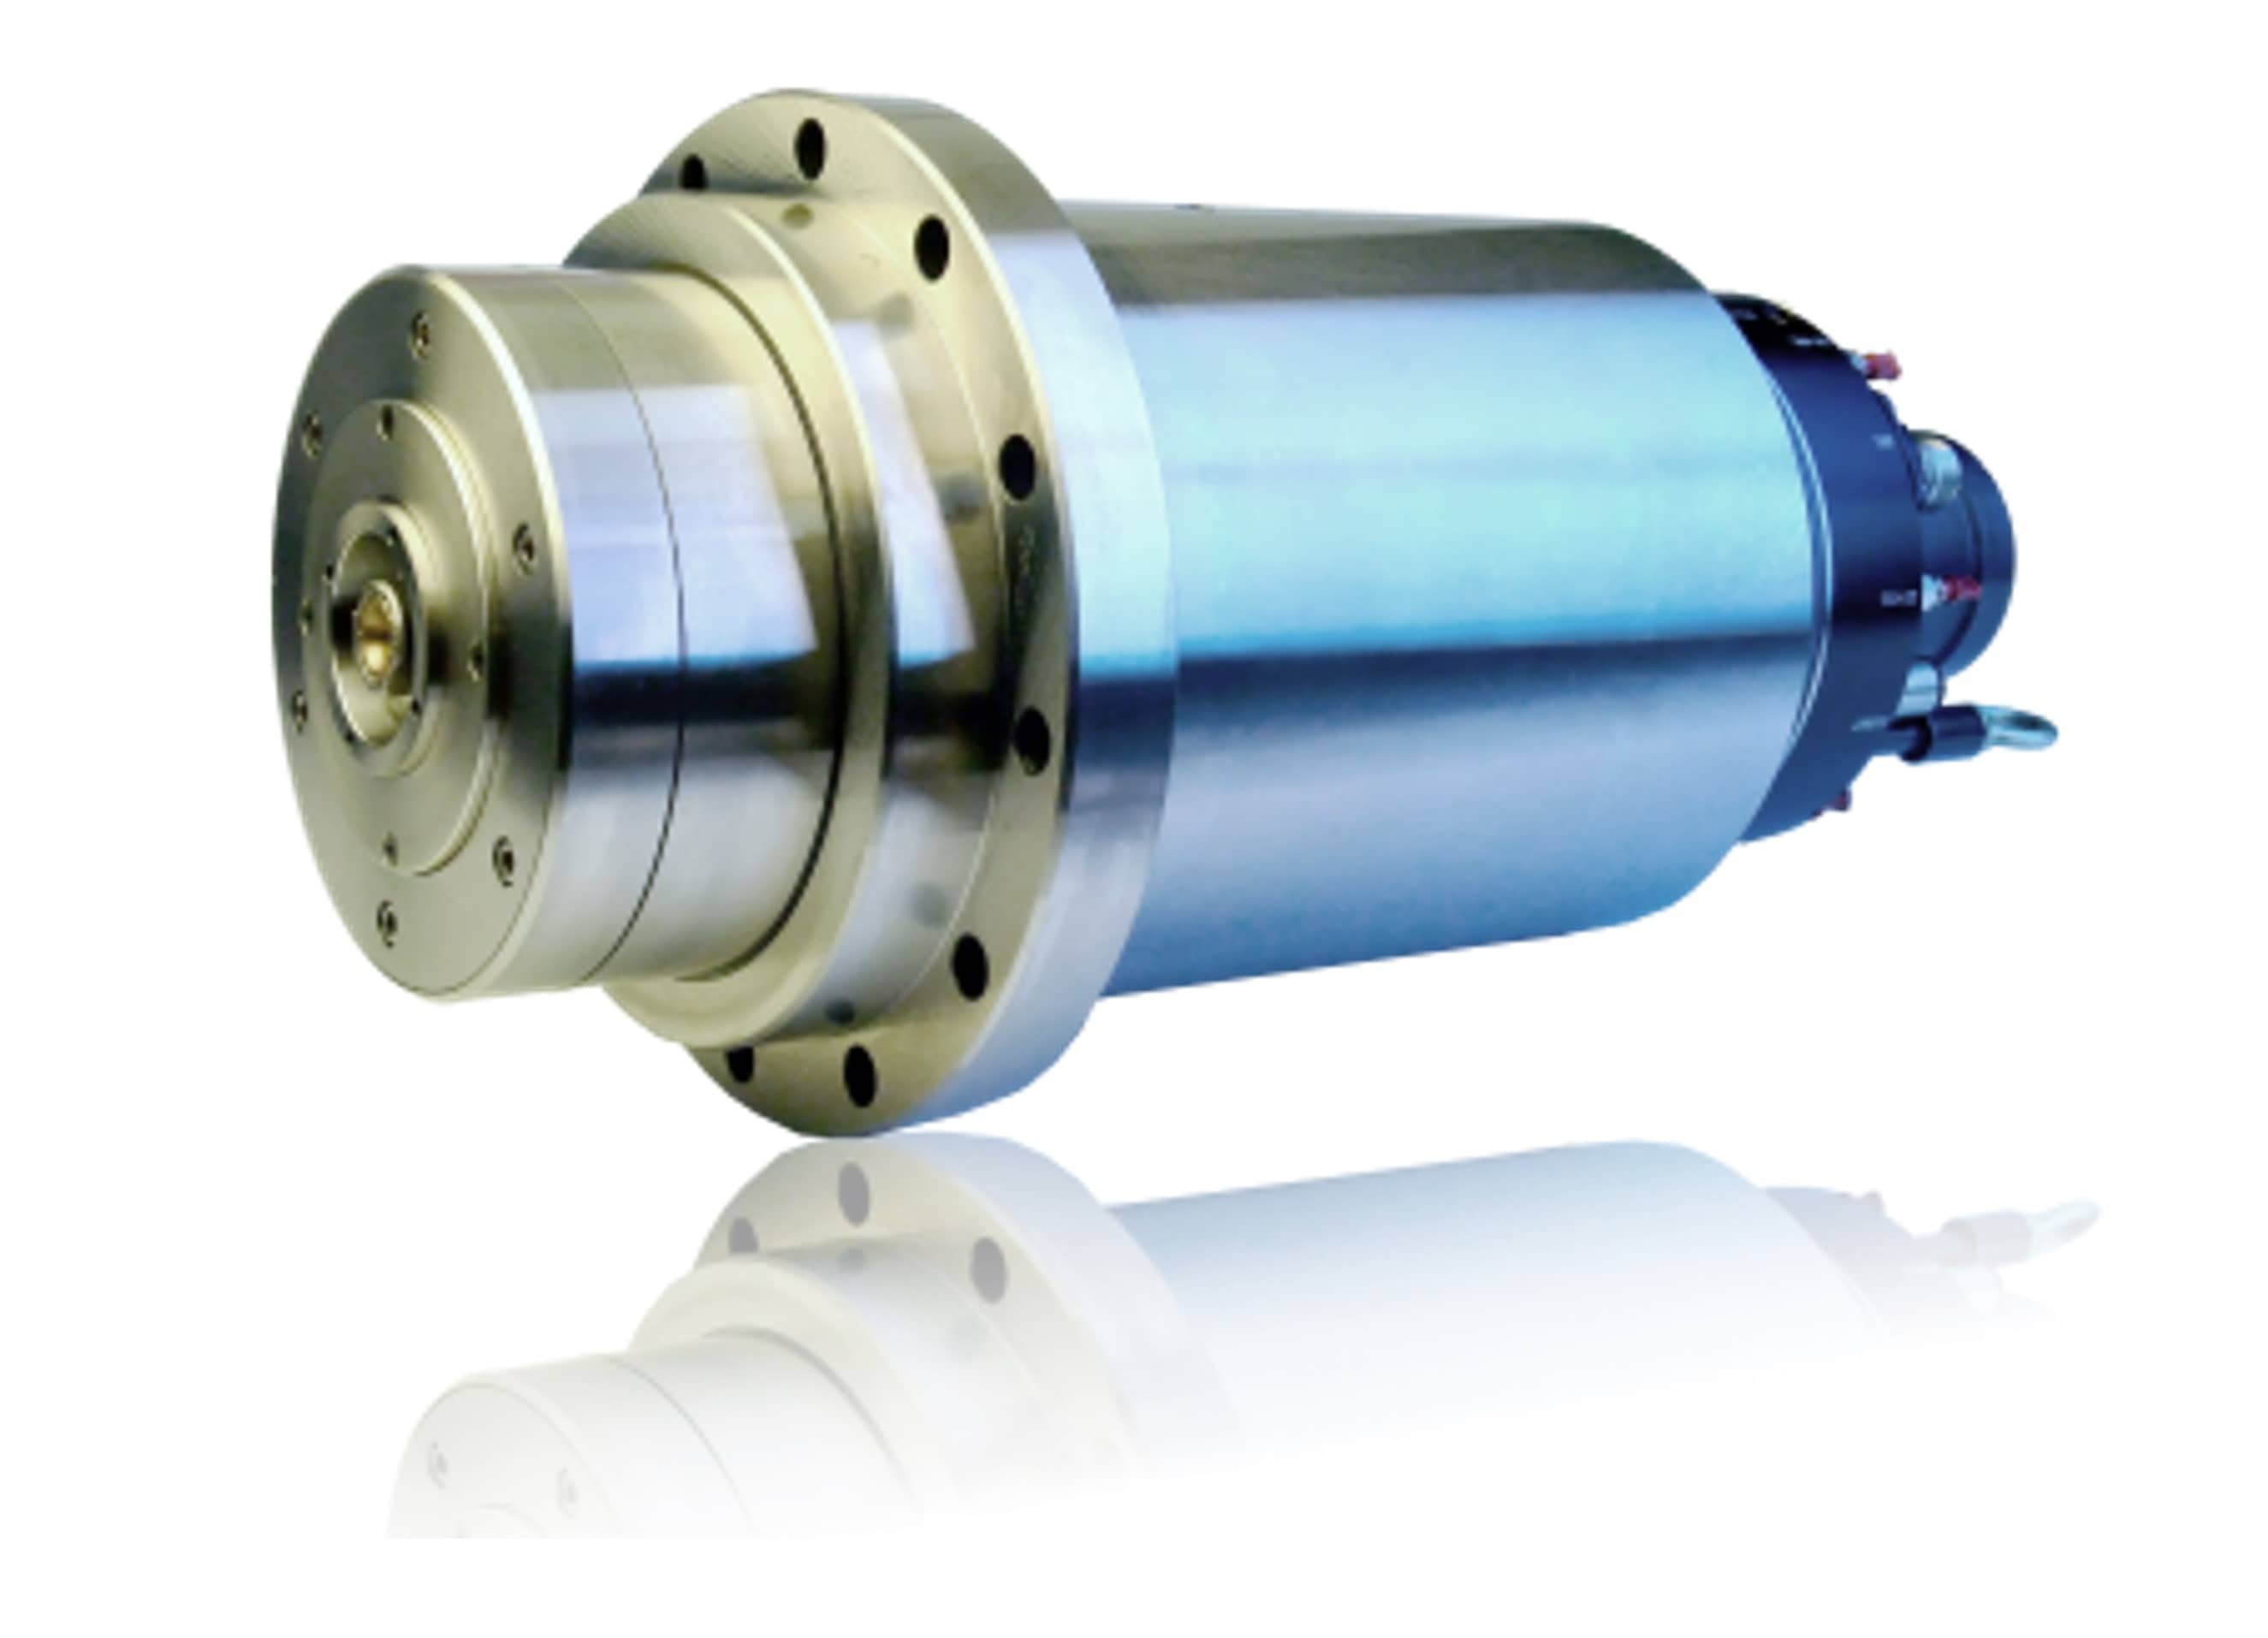 SY-210B Built-in motor spindle(HSK-A63)